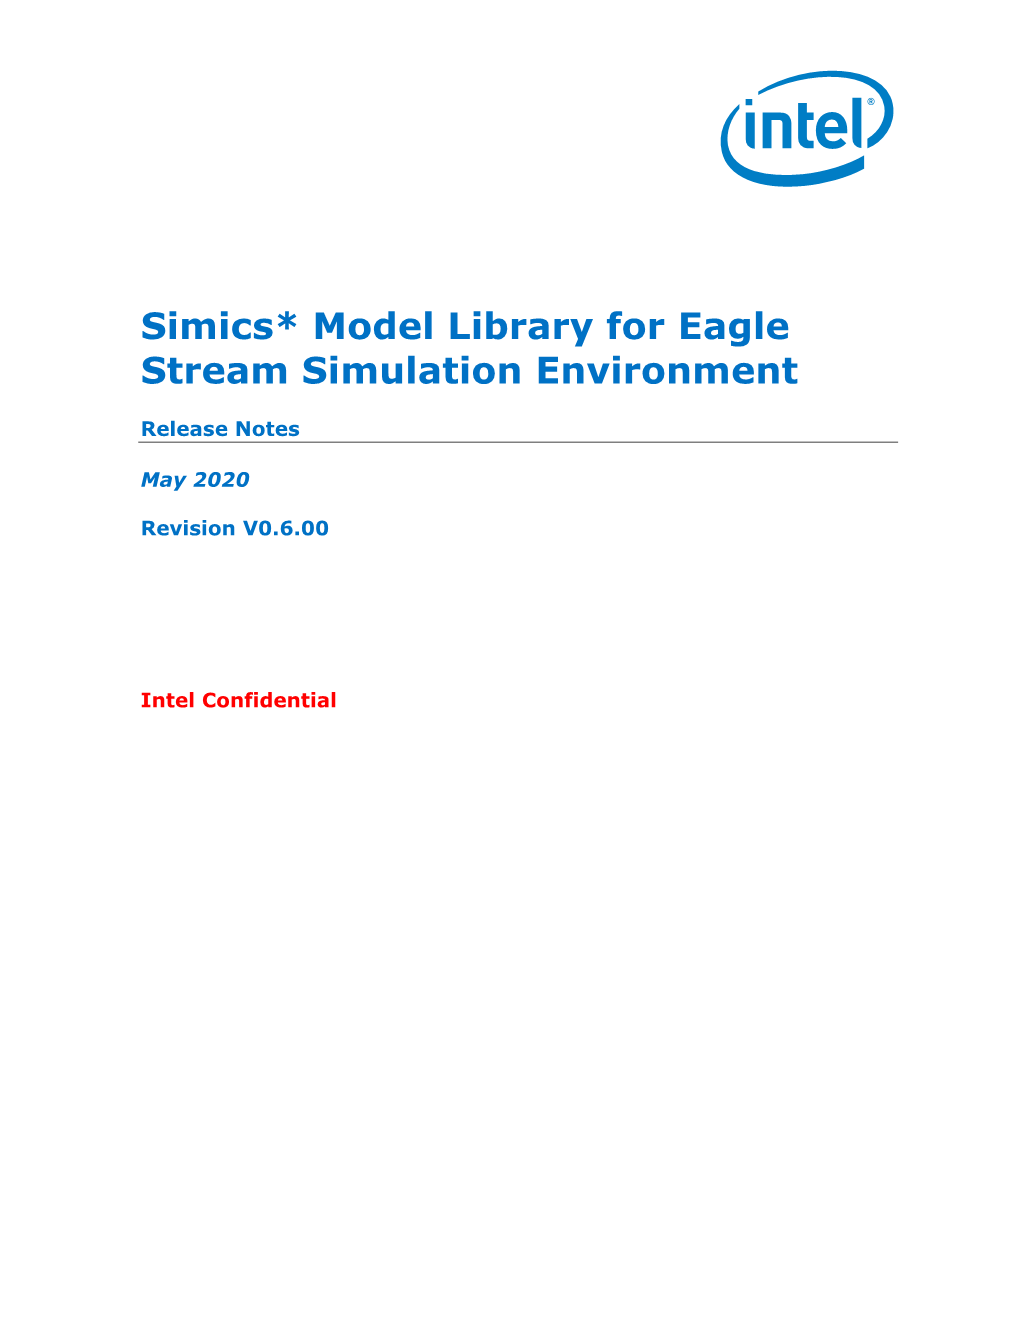 Simics* Model Library for Eagle Stream Simulation Environment